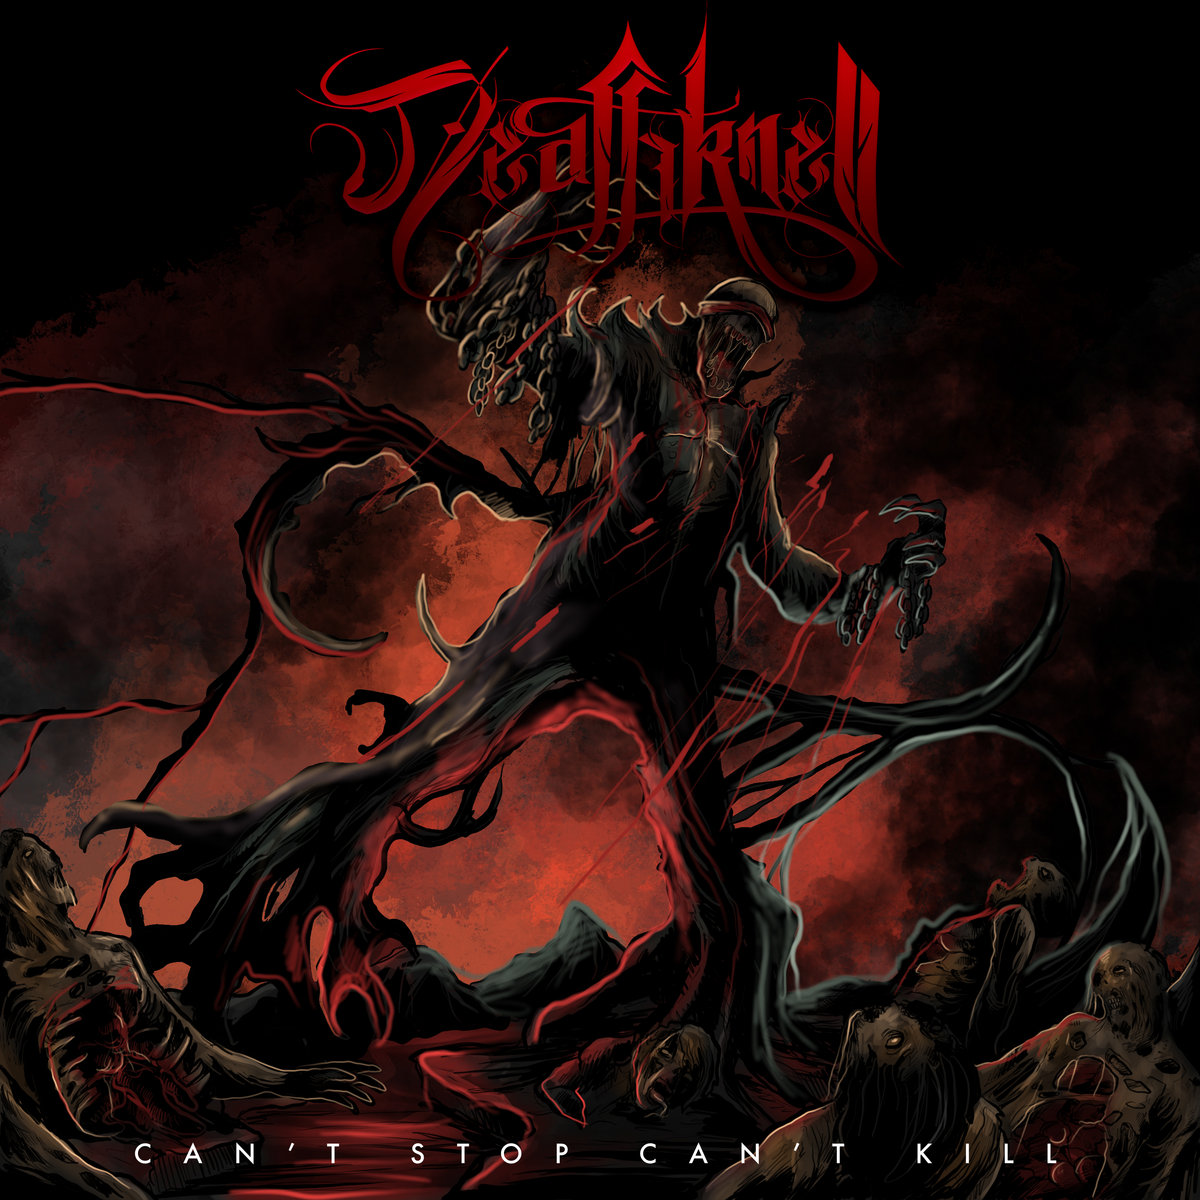 INDIAN BANDS HUB: Deathknell